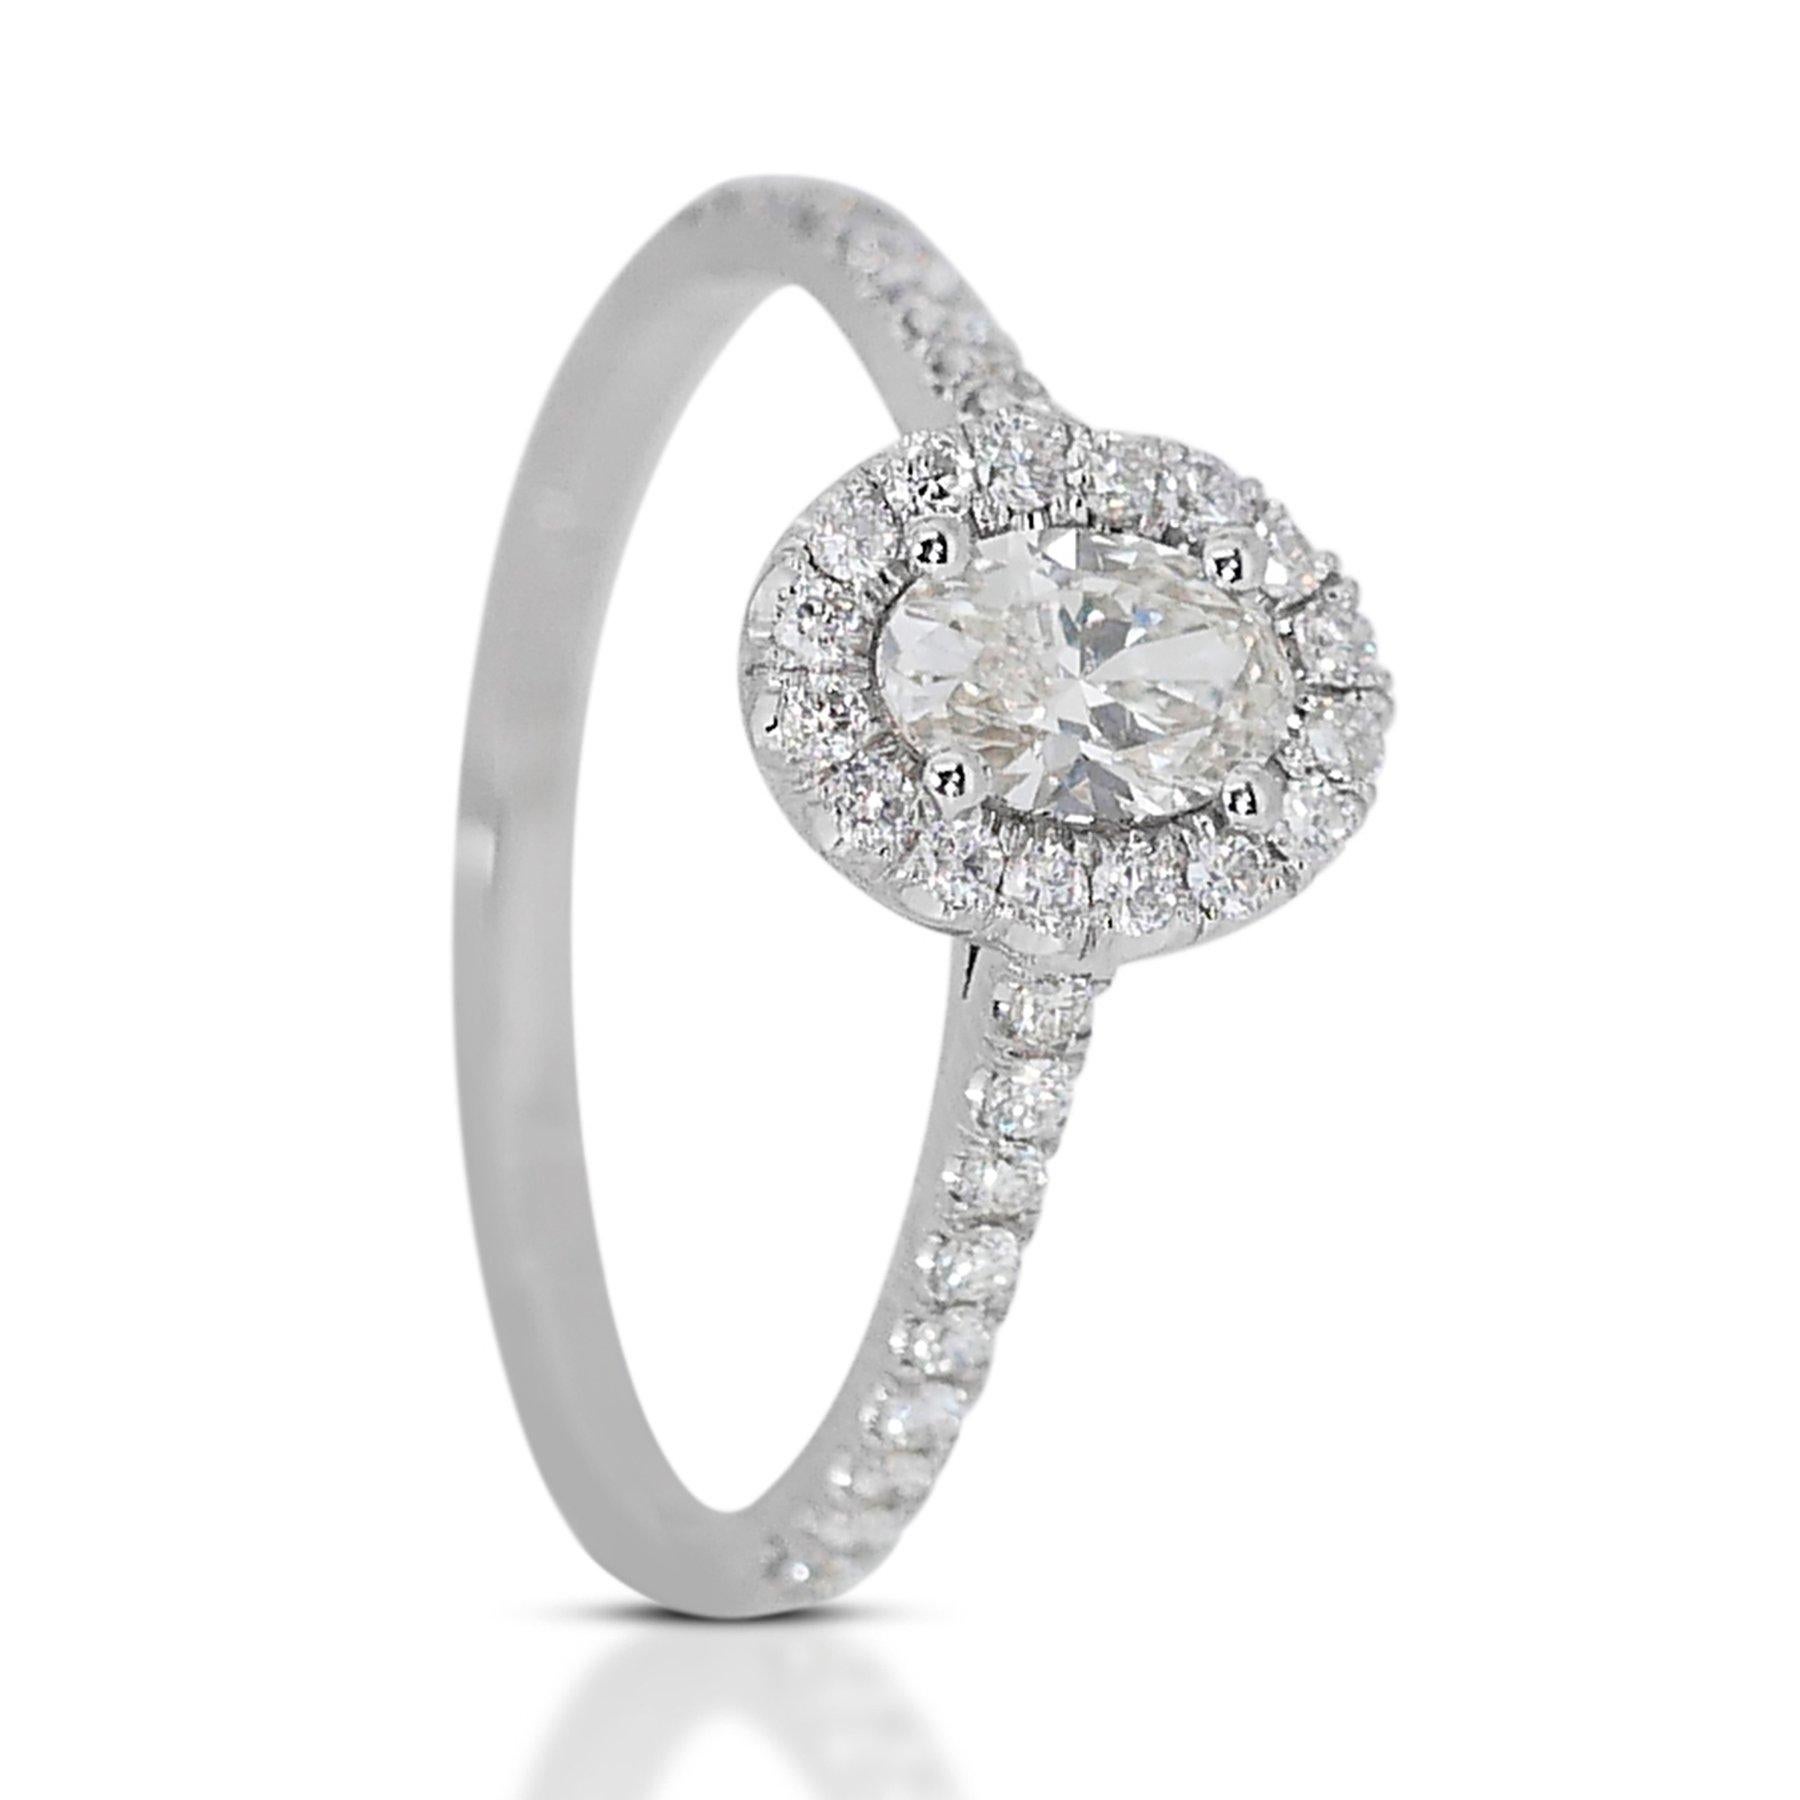 Sparkling 1.00ct Oval Diamond Halo Ring in 18k White Gold - GIA Certified

This refined diamond halo ring, expertly crafted in 18k white gold, showcases a stunning 0.70ct oval-shaped main diamond. Encircling the main stone are 34 round-cut side